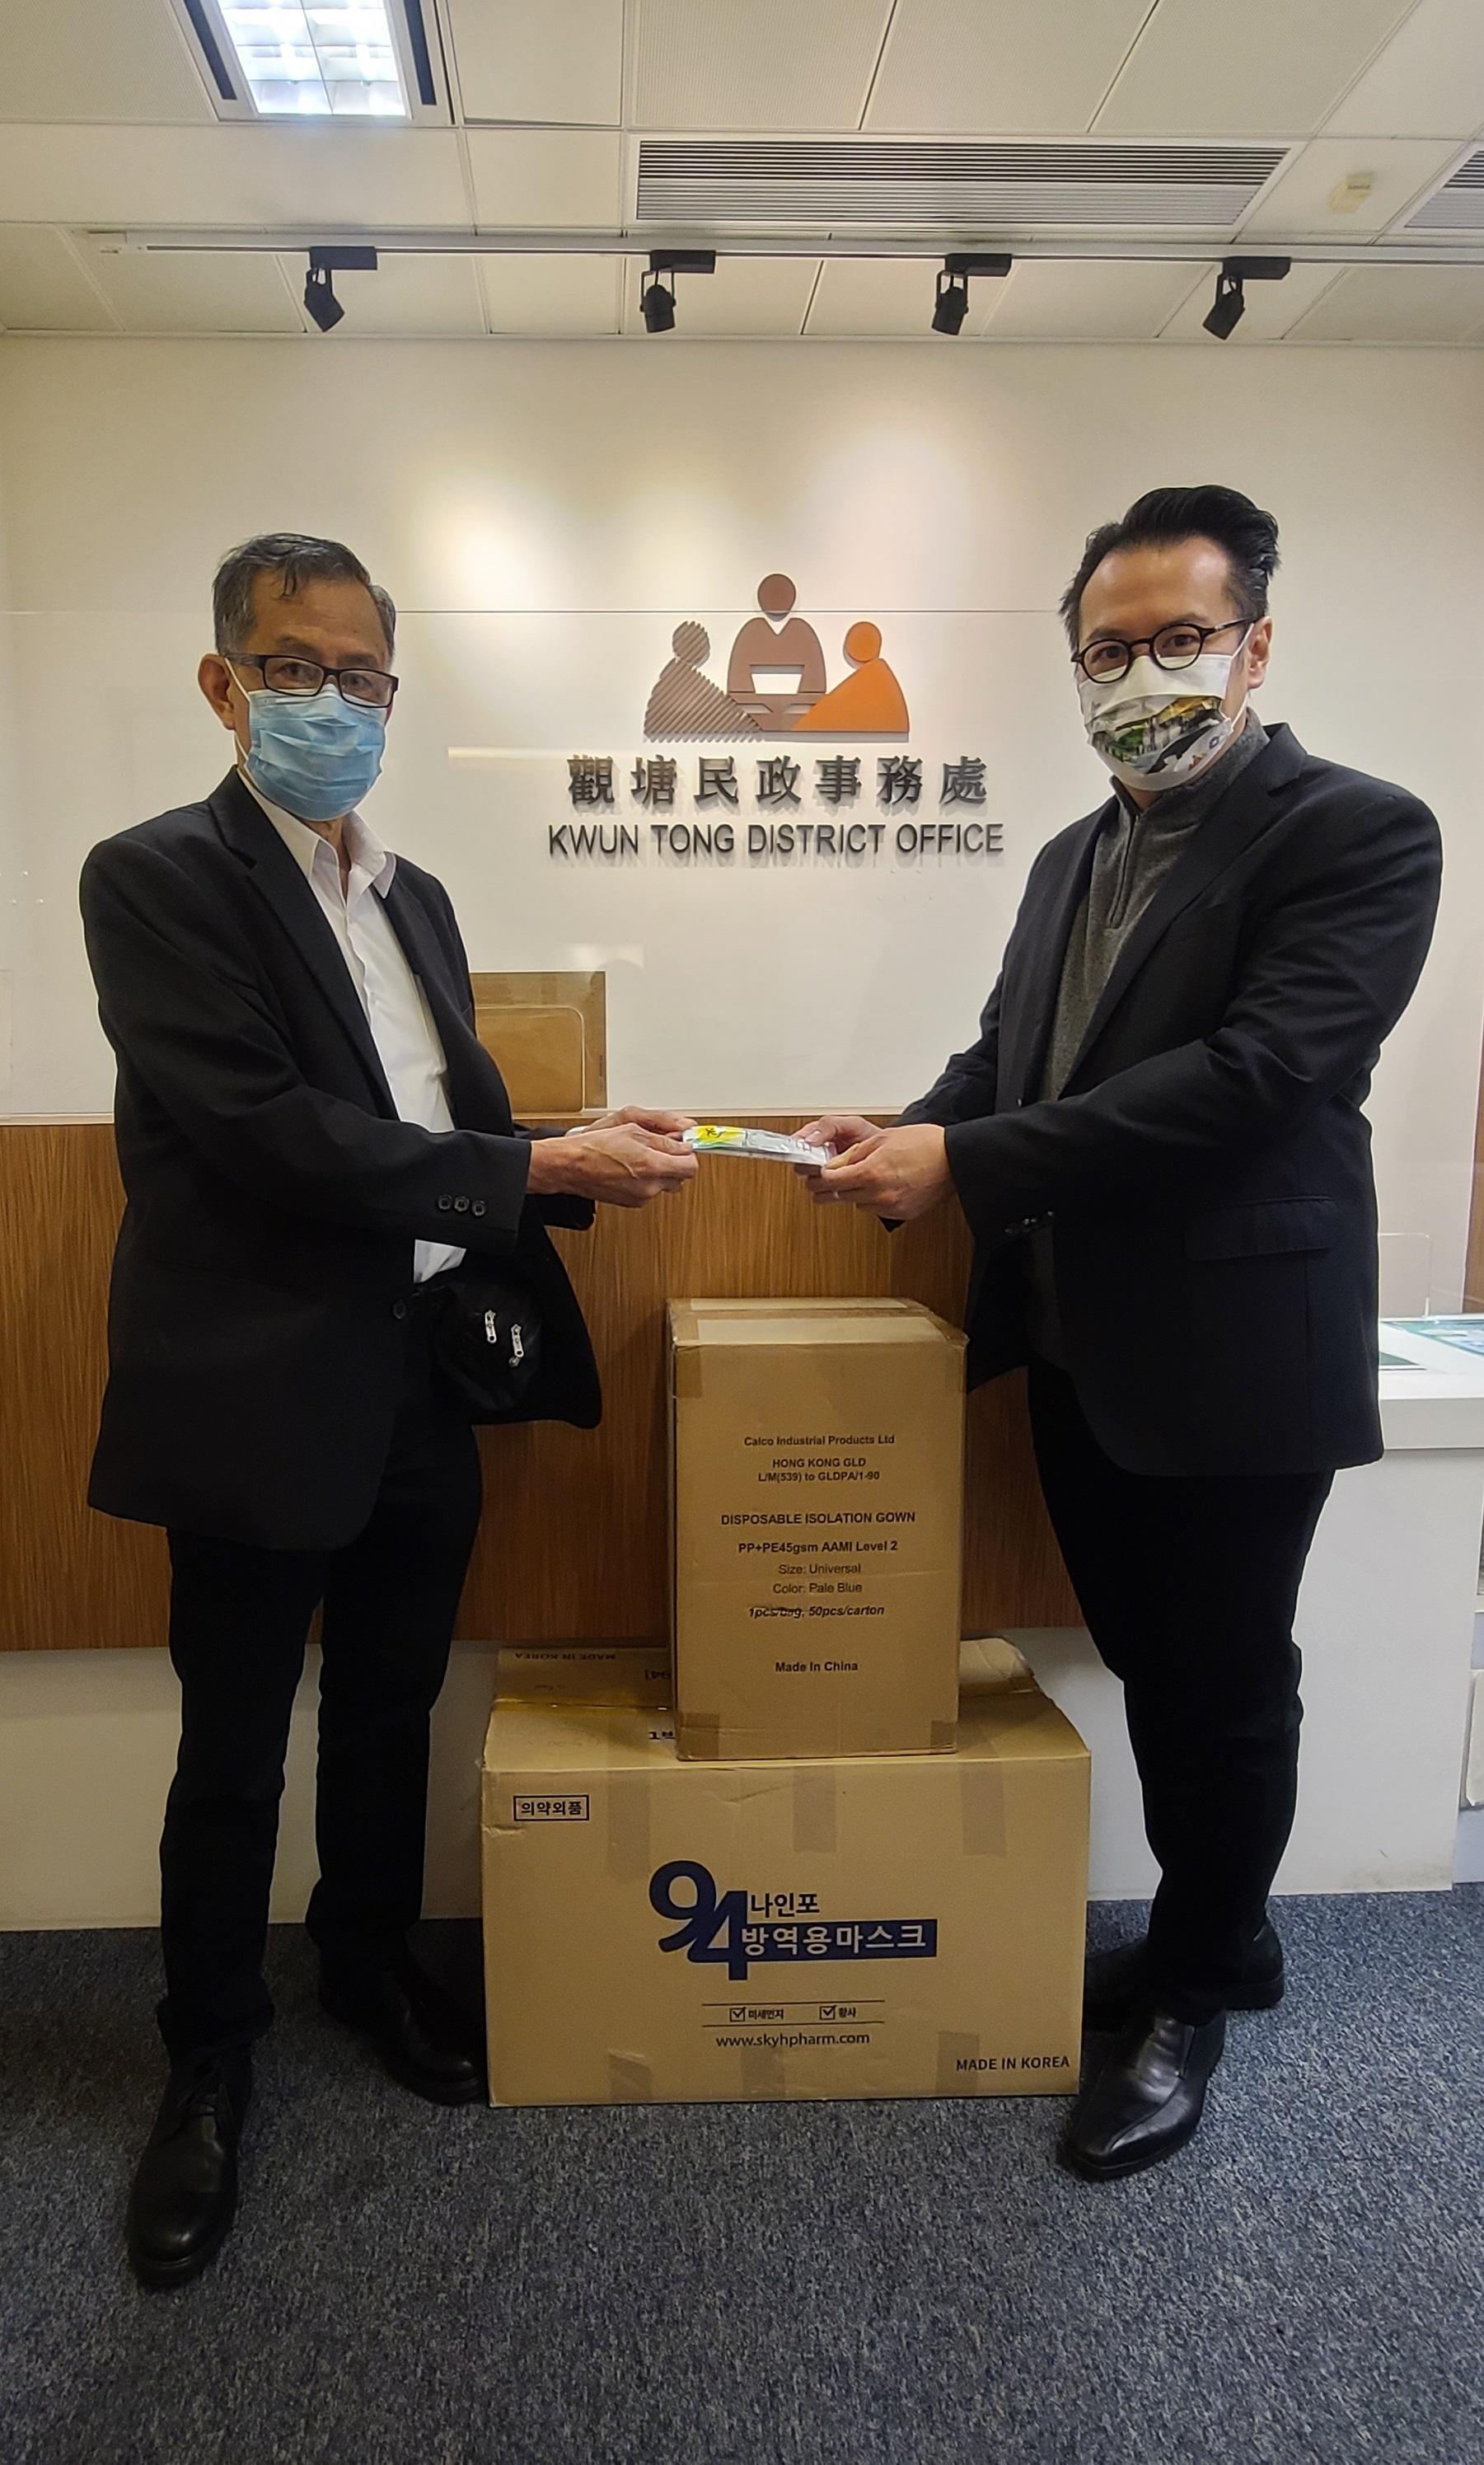 The Kwun Tong District Office today (February 8) distributed COVID-19 rapid test kits to cleansing workers and property management staff working in the affected buildings of Yau Lai Estate for voluntary testing through the property management company of the Estate.